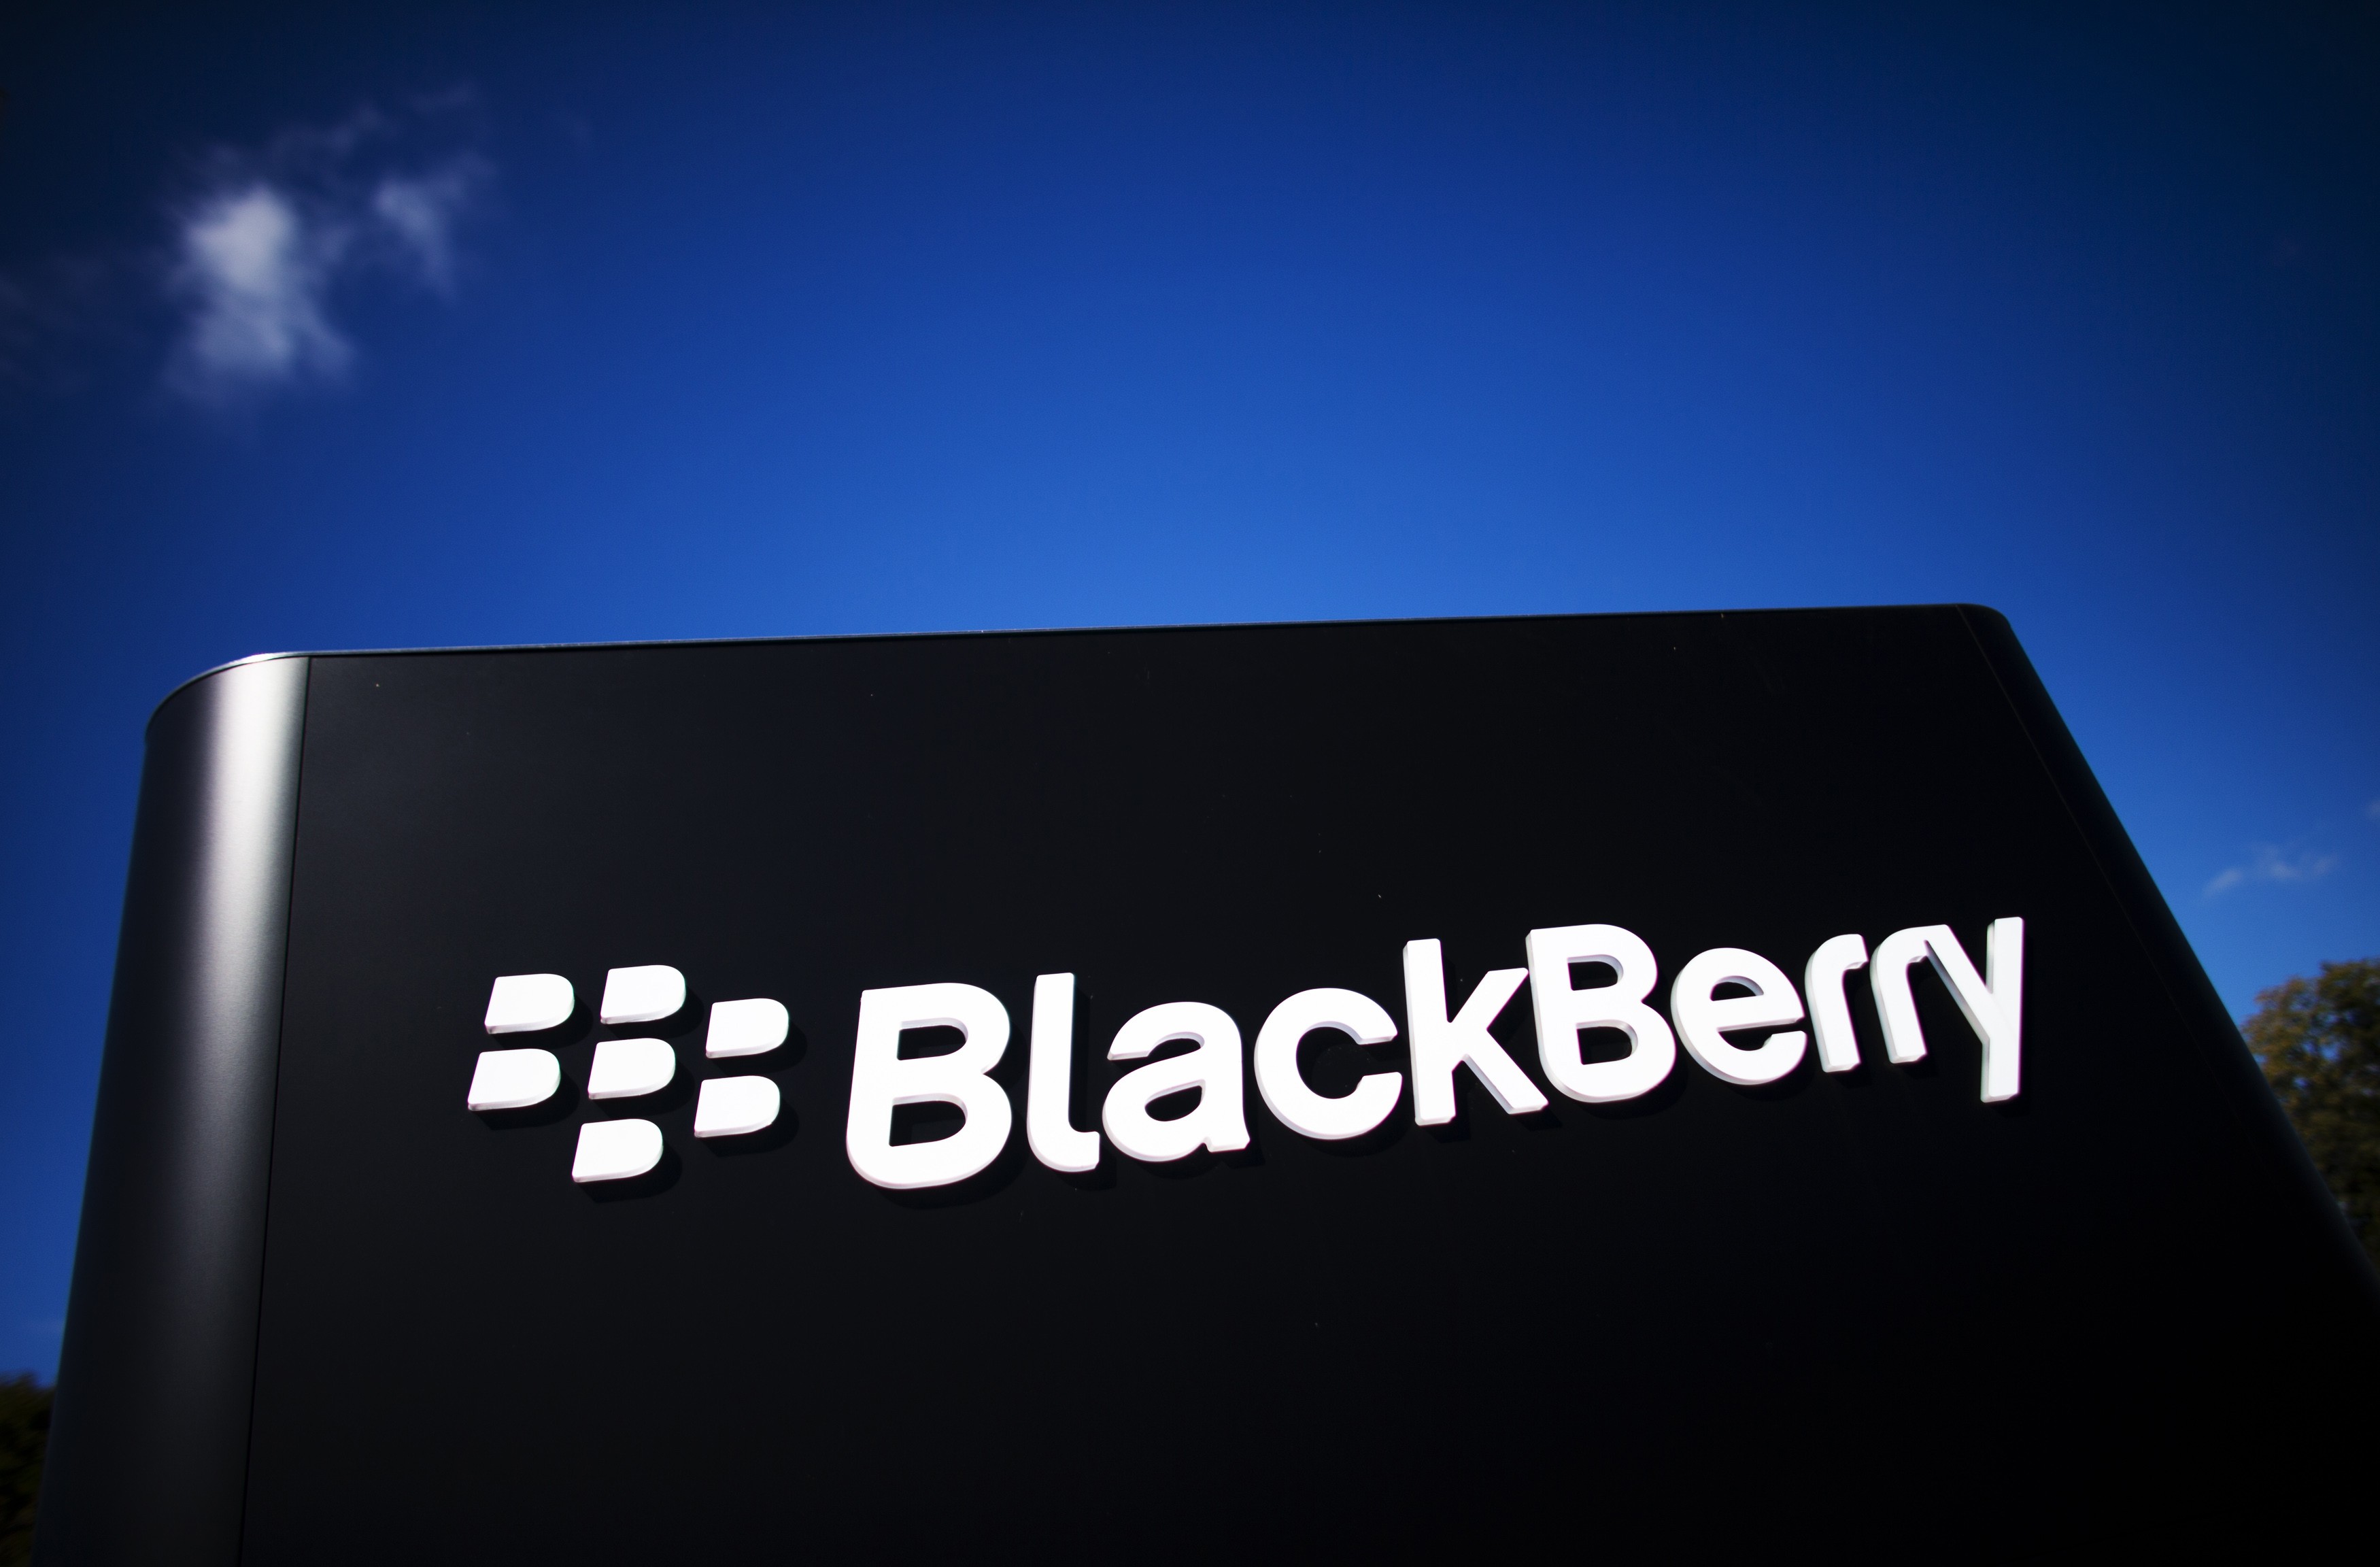 Ailing BlackBerry agrees to $4.7 billion buyout